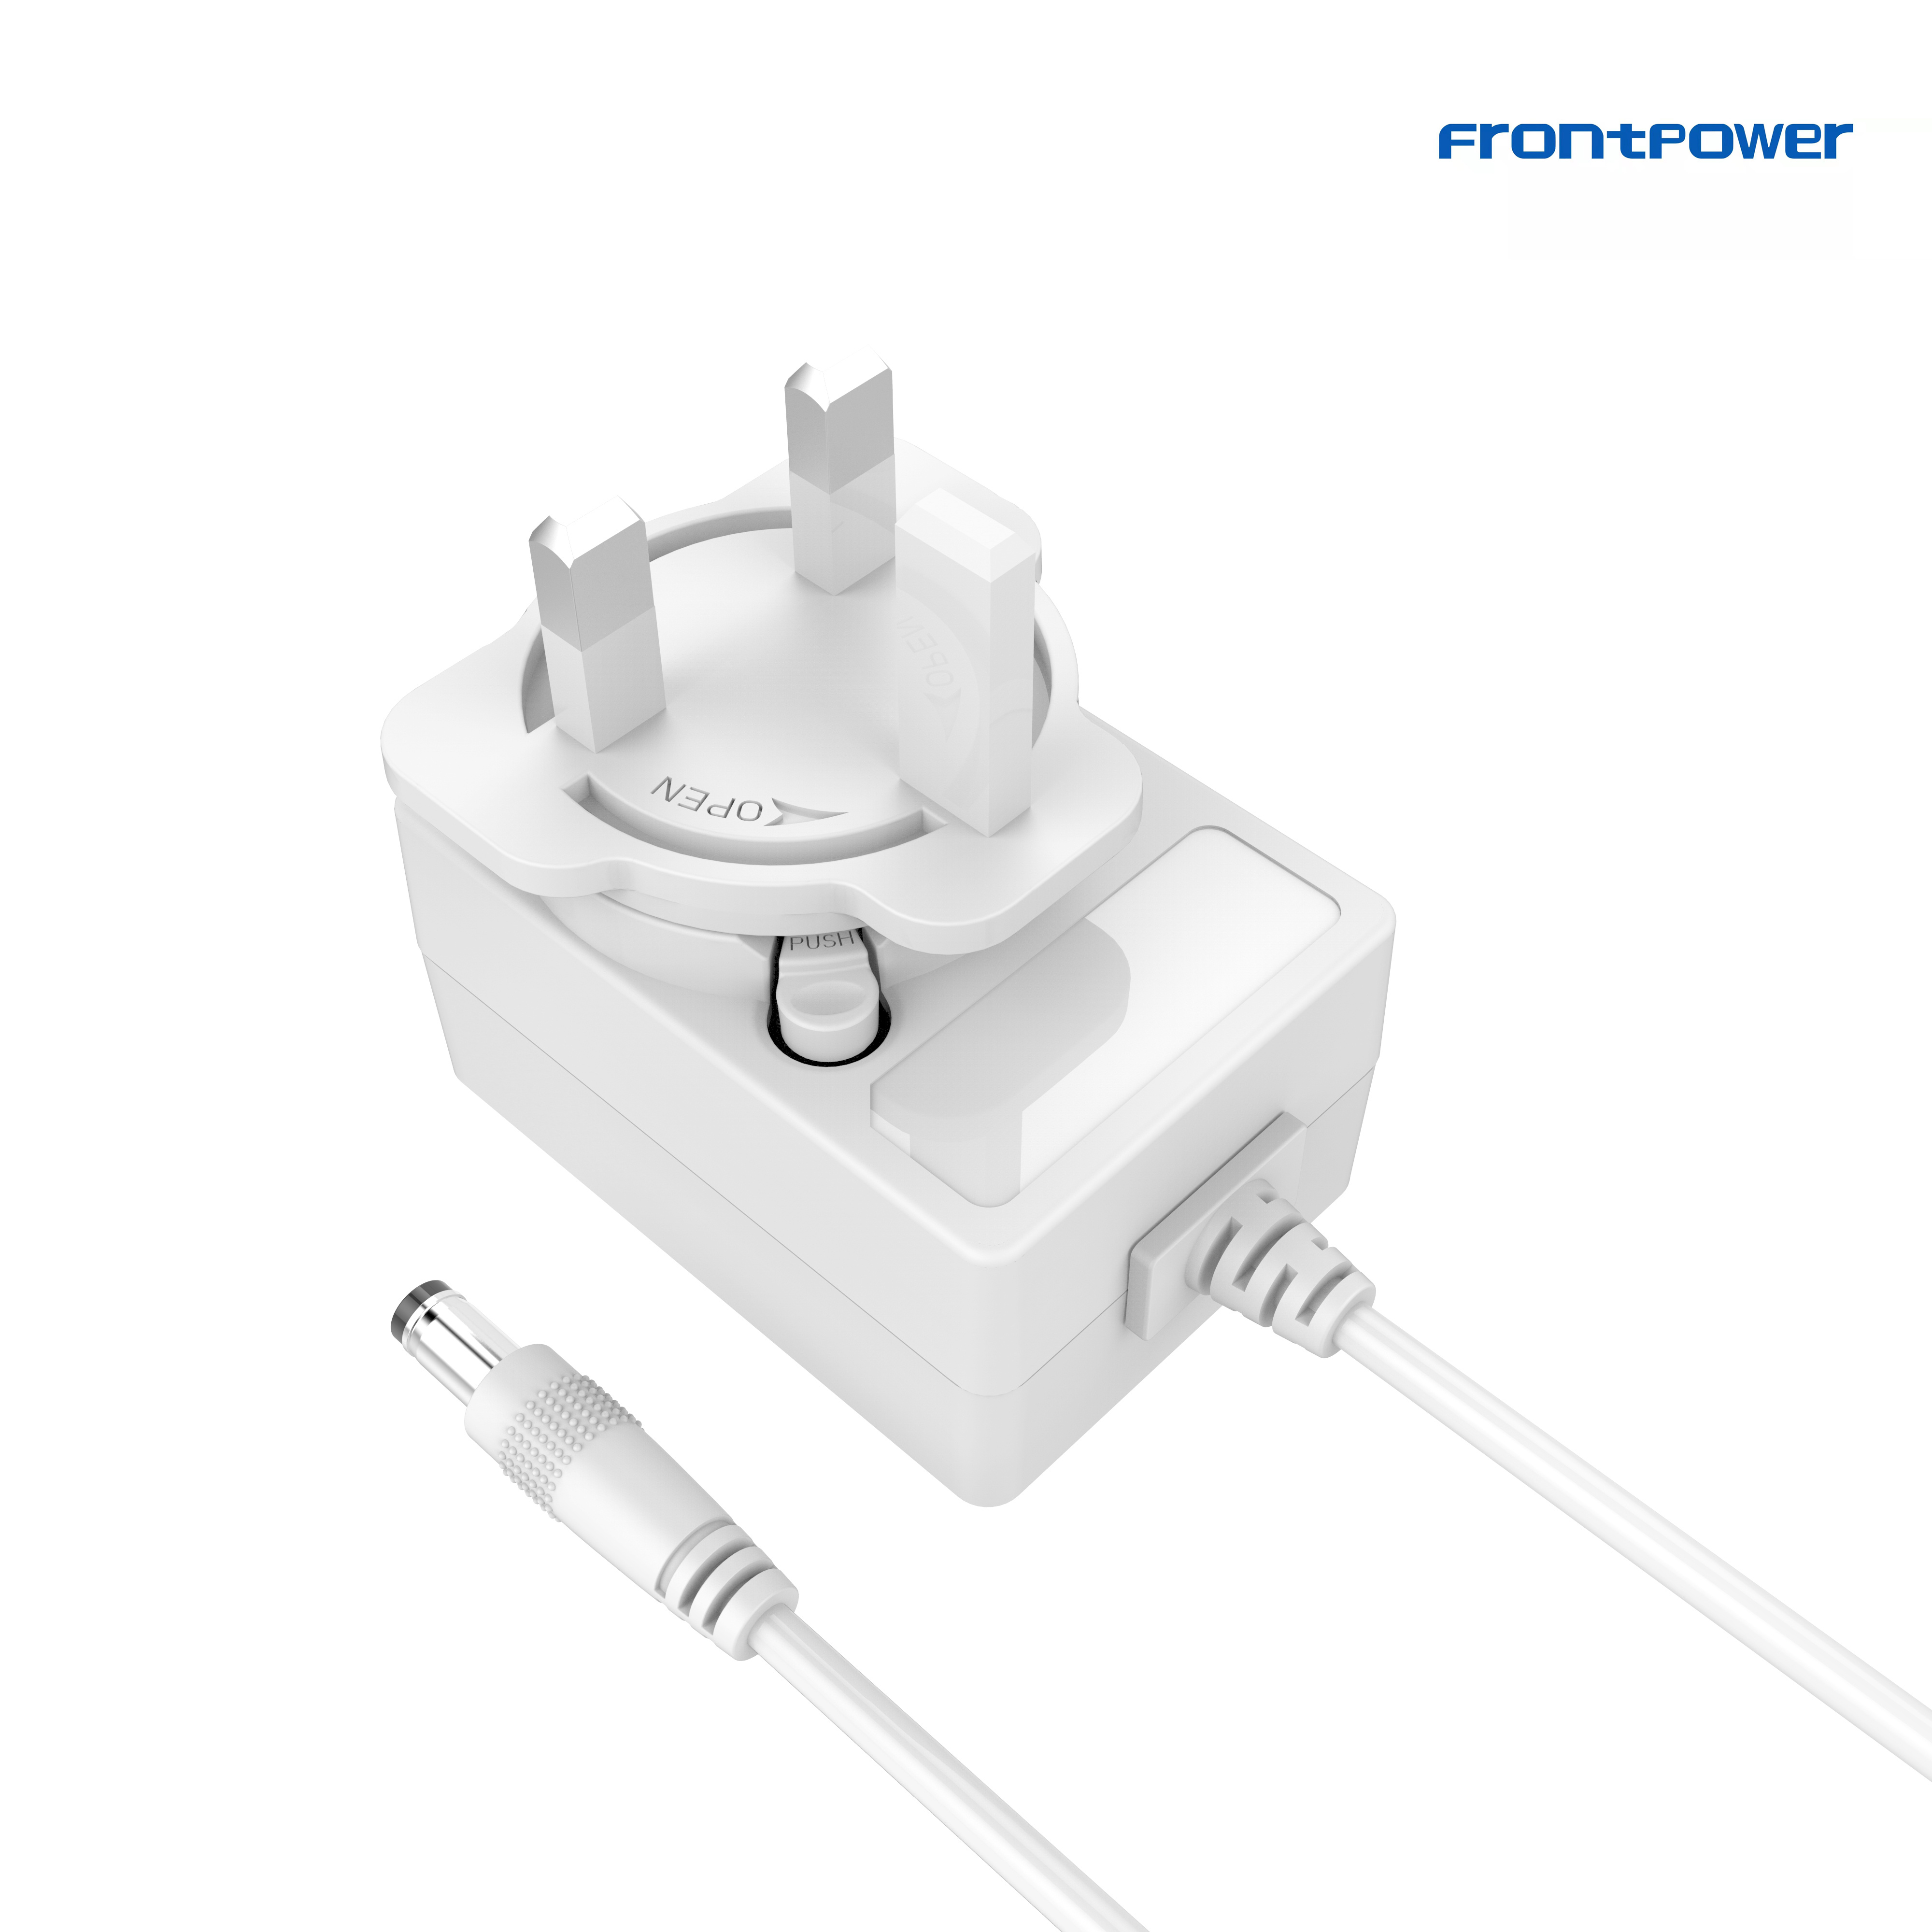 Frontpower adapter ECAS certificate 12W 5V 2A 5V 2.5A 6V 1A 6V 2A 8V 1.5A changeable type adapter